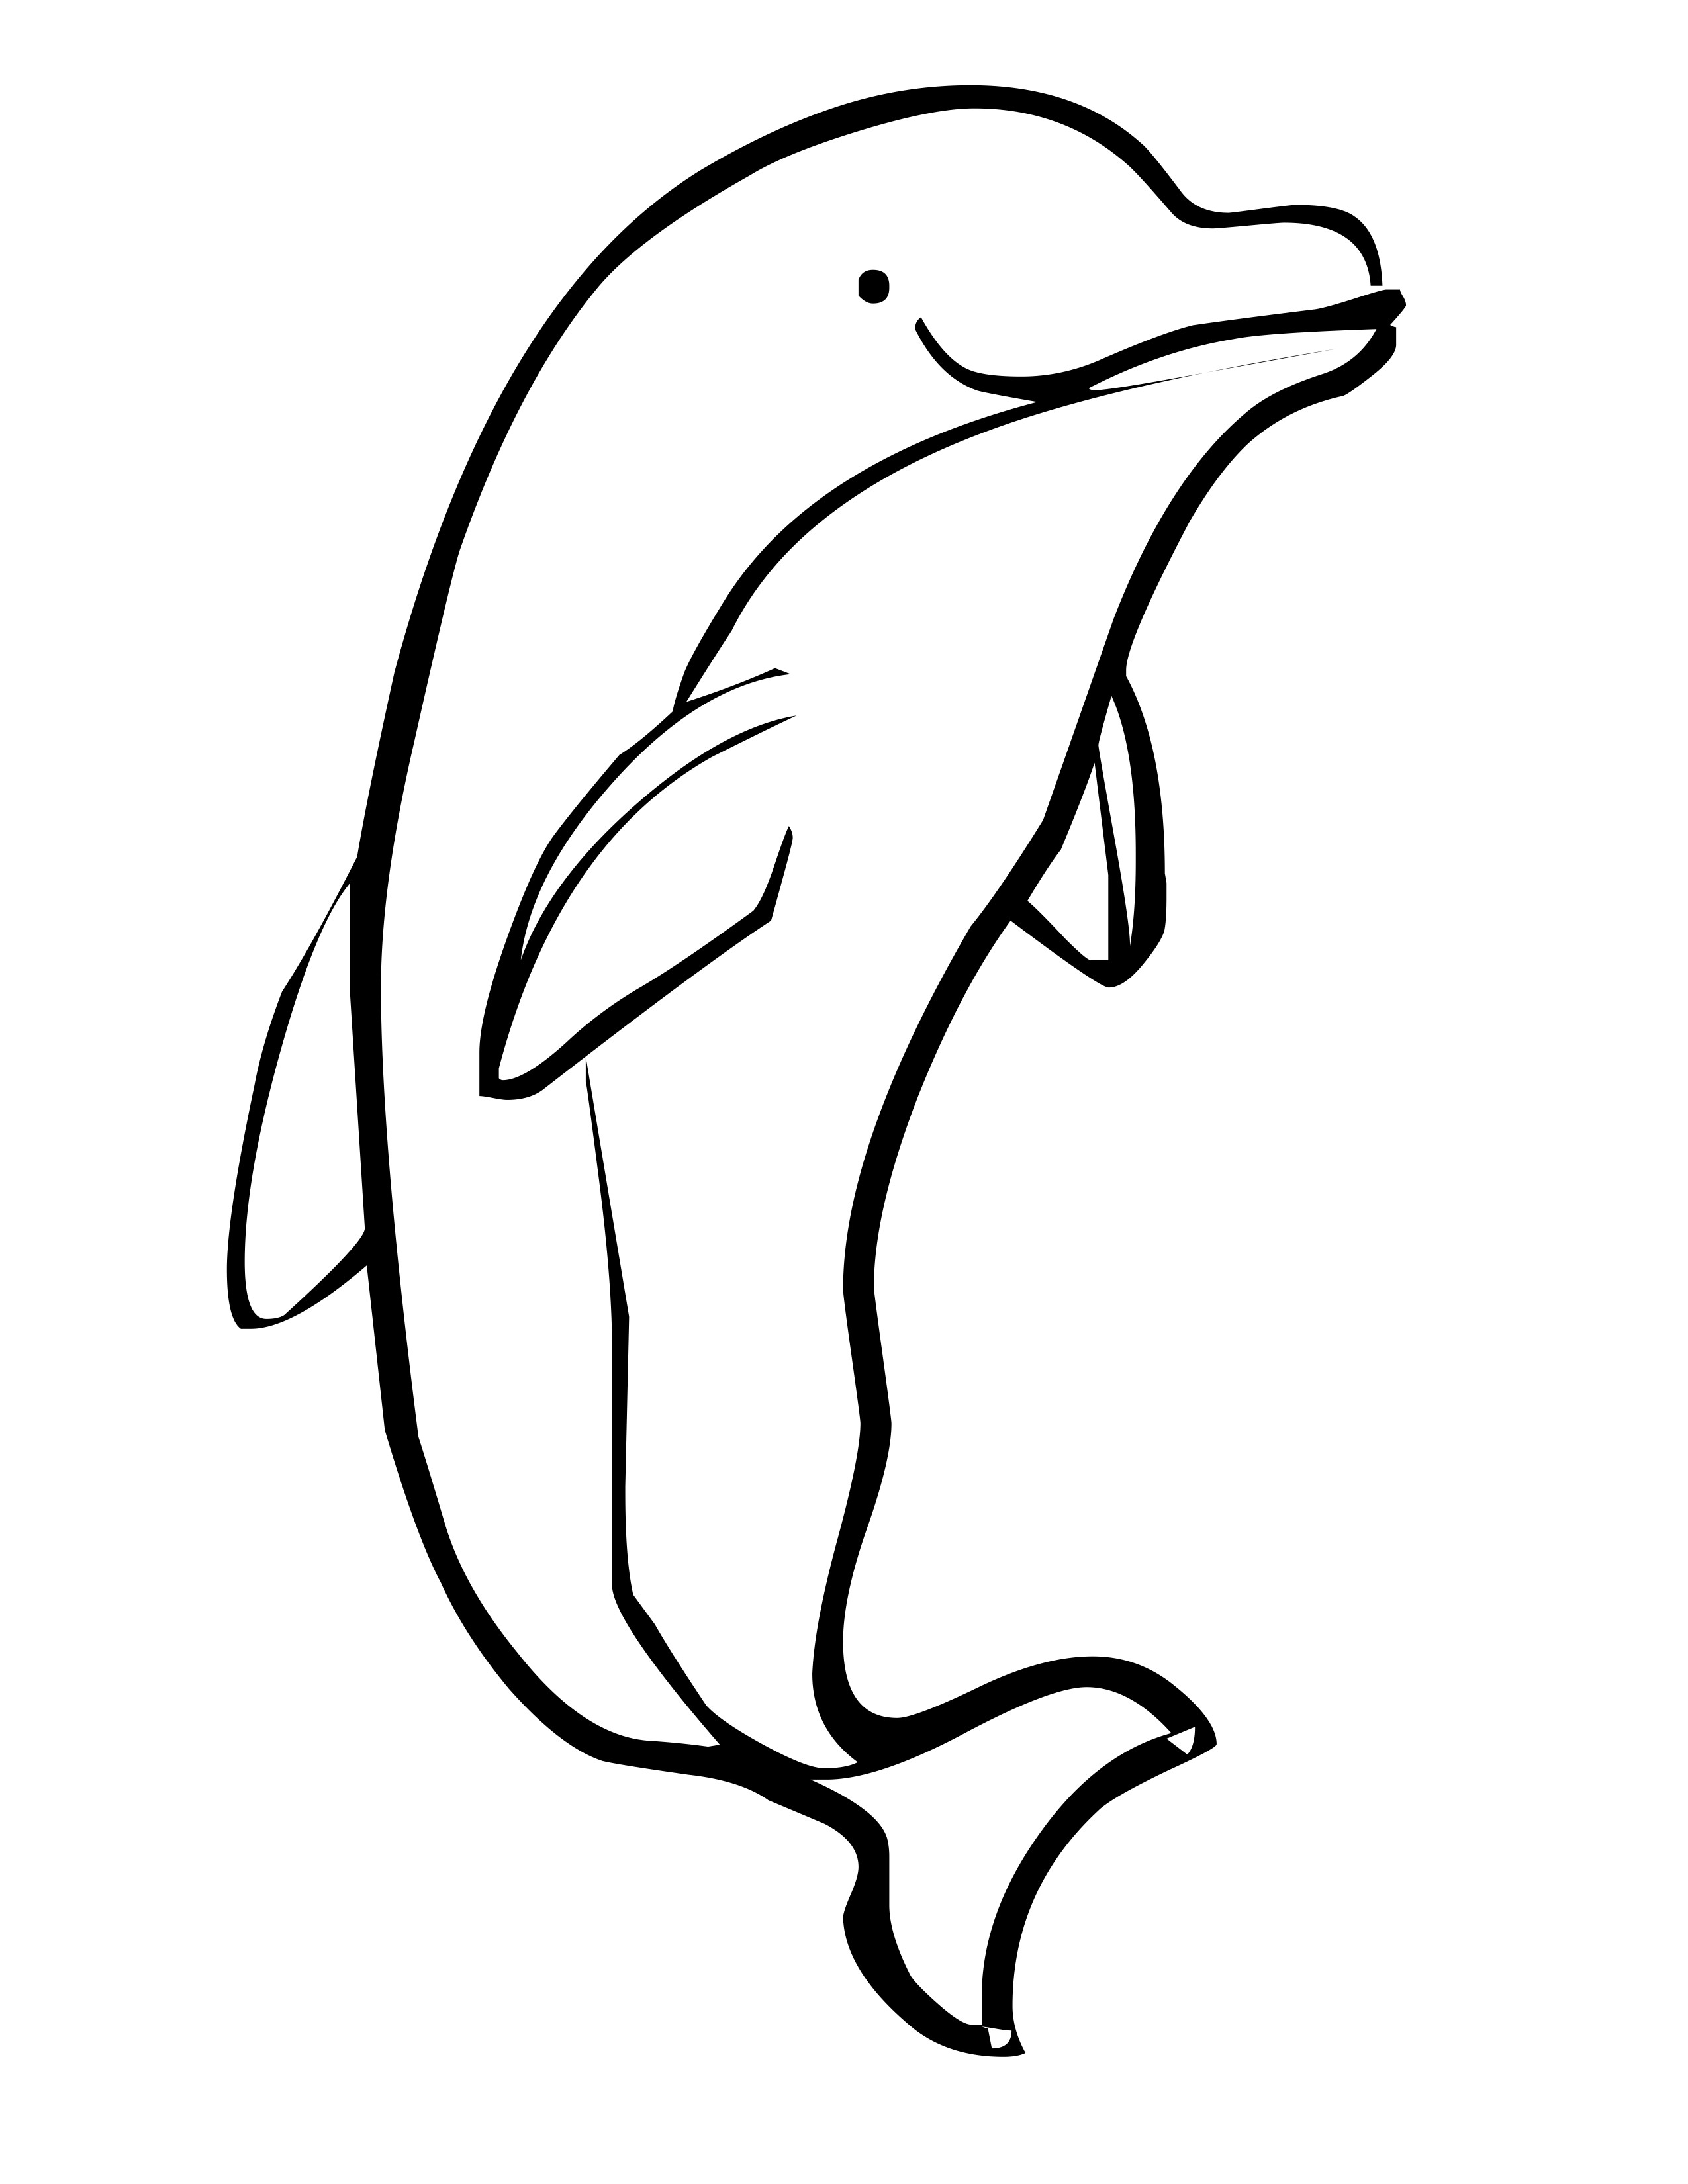 dolphin color sheet dolphin coloring pages coloring pages to print color sheet dolphin 